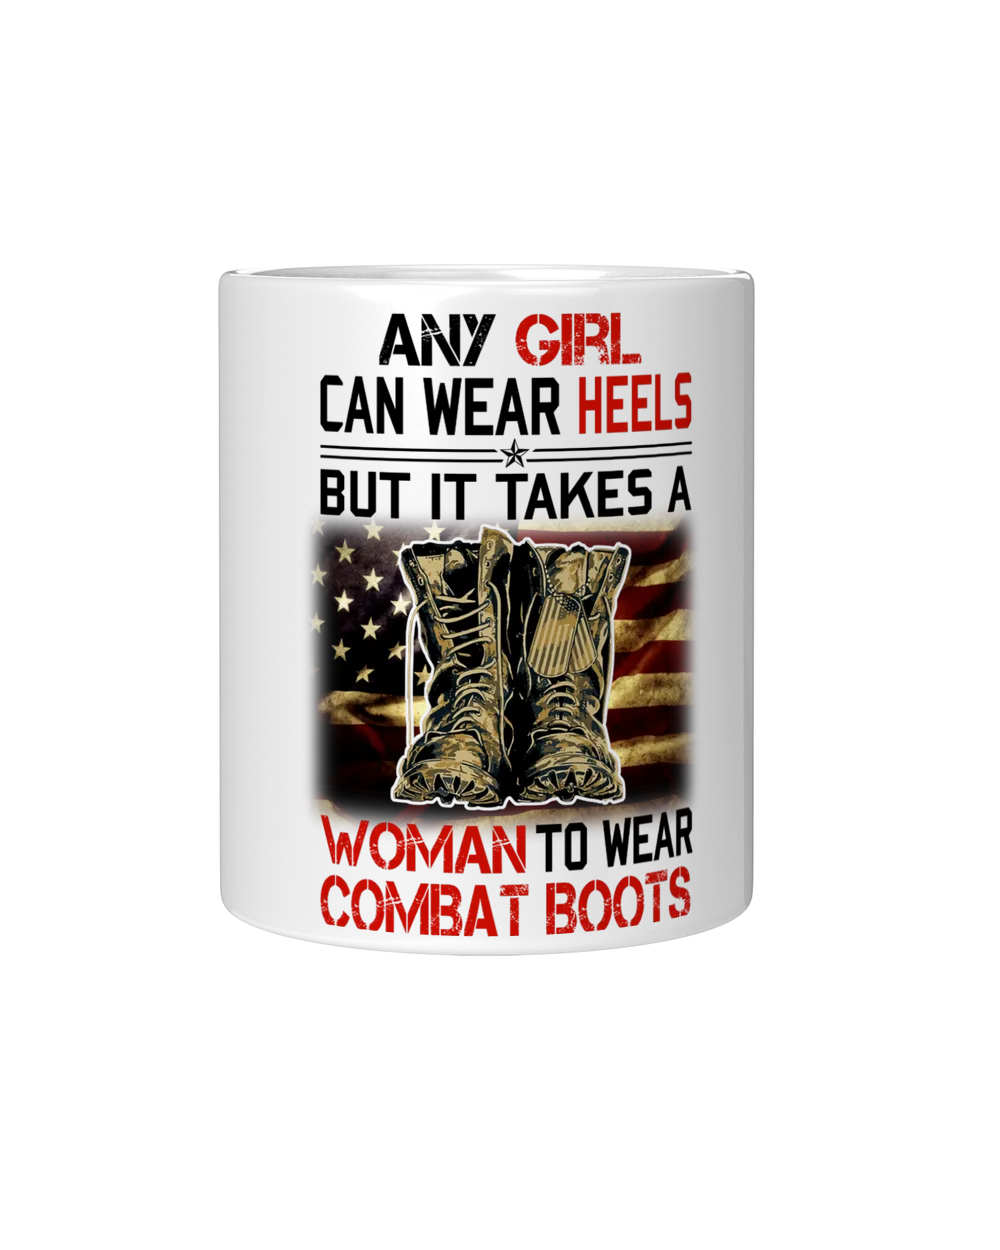 Woman To Wear Combat Boots